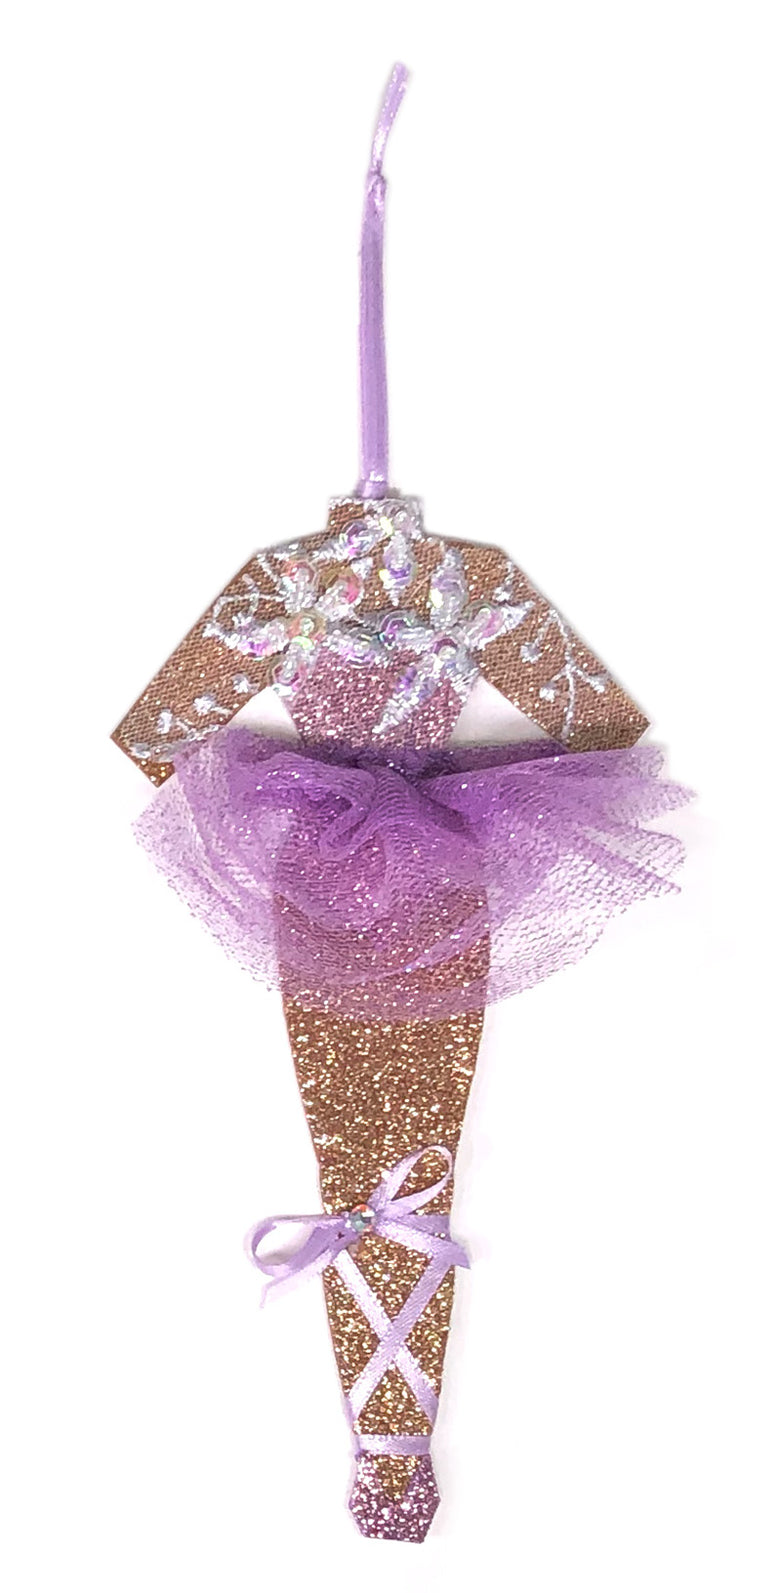 Lavender Dream Ballerina Christmas Ornament by Heather French Henry